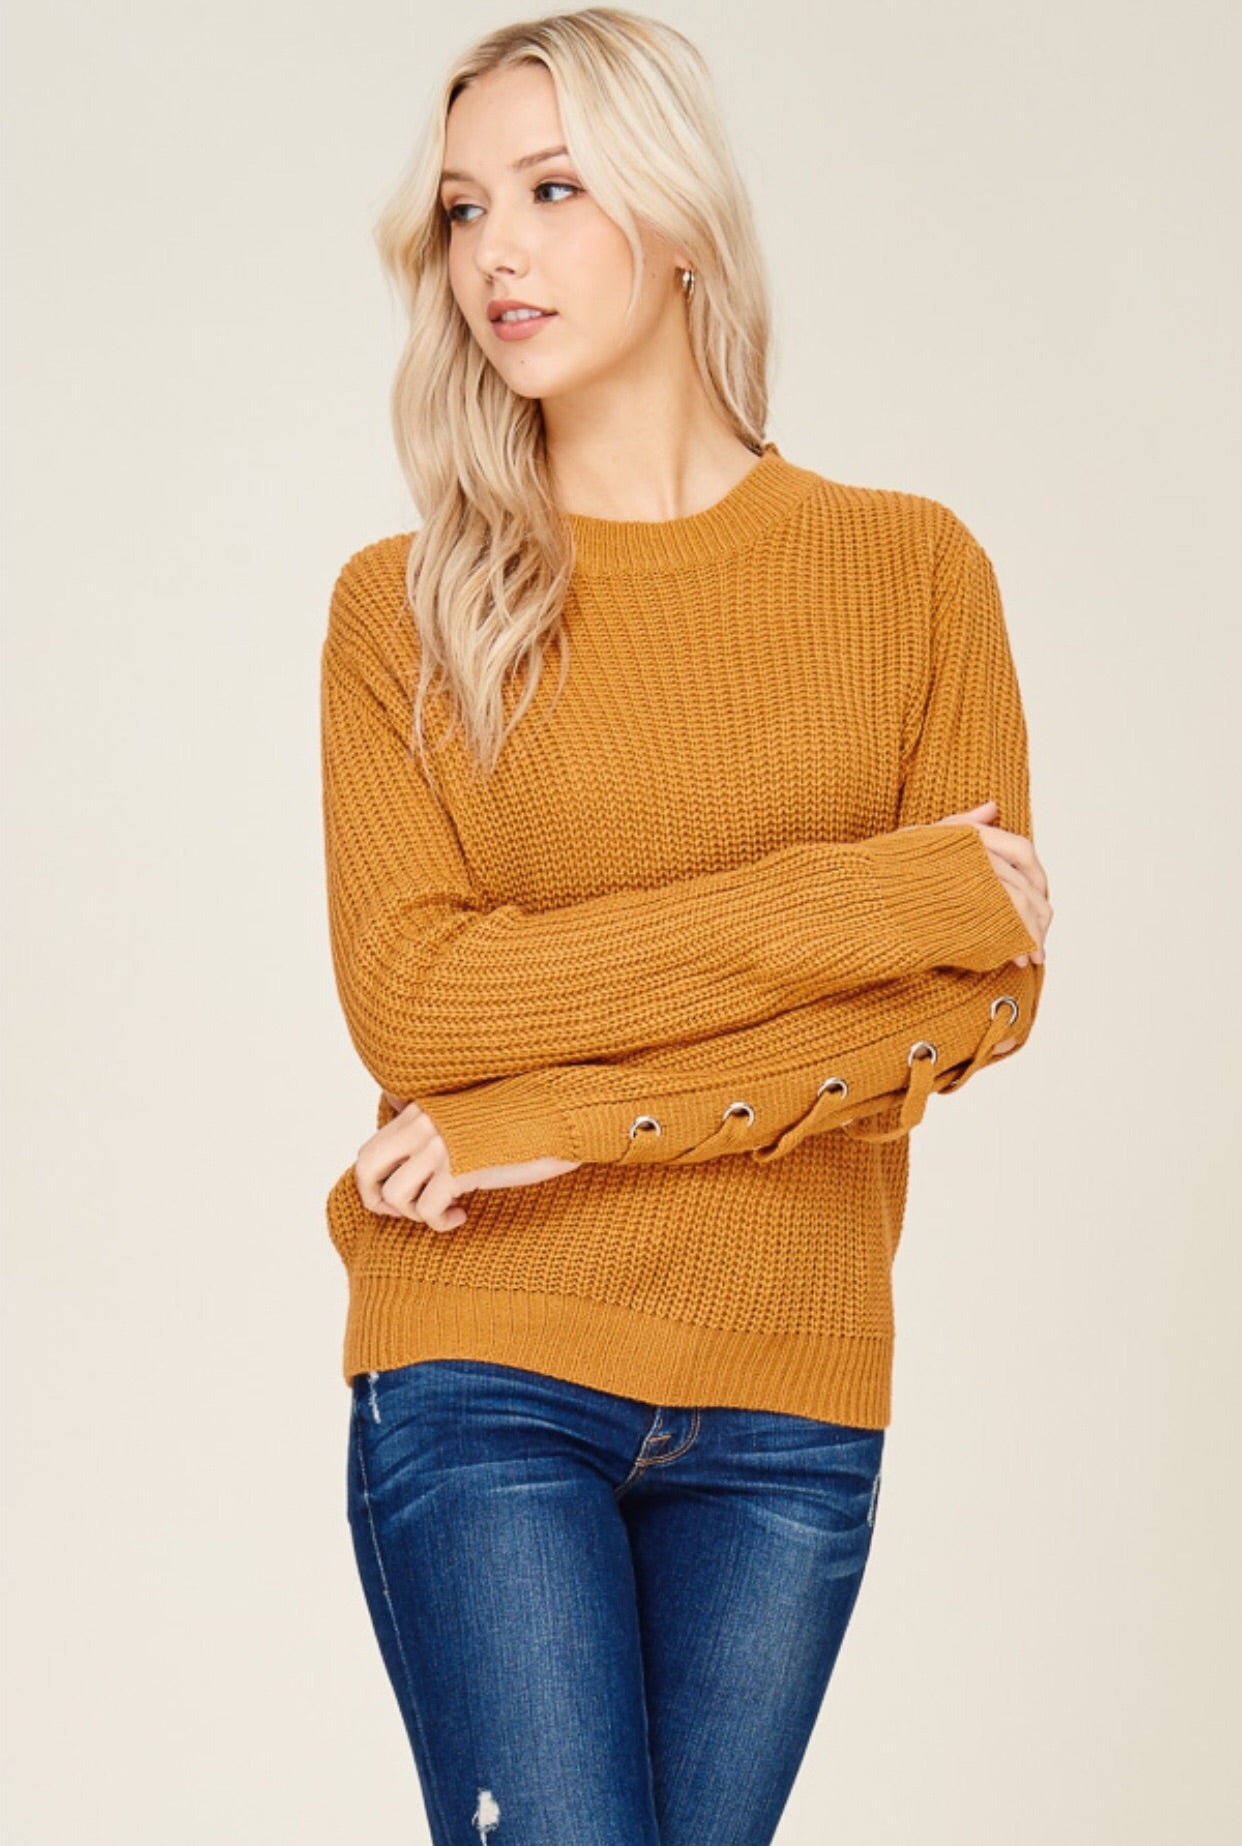 Turmeric Lace Up Sweater